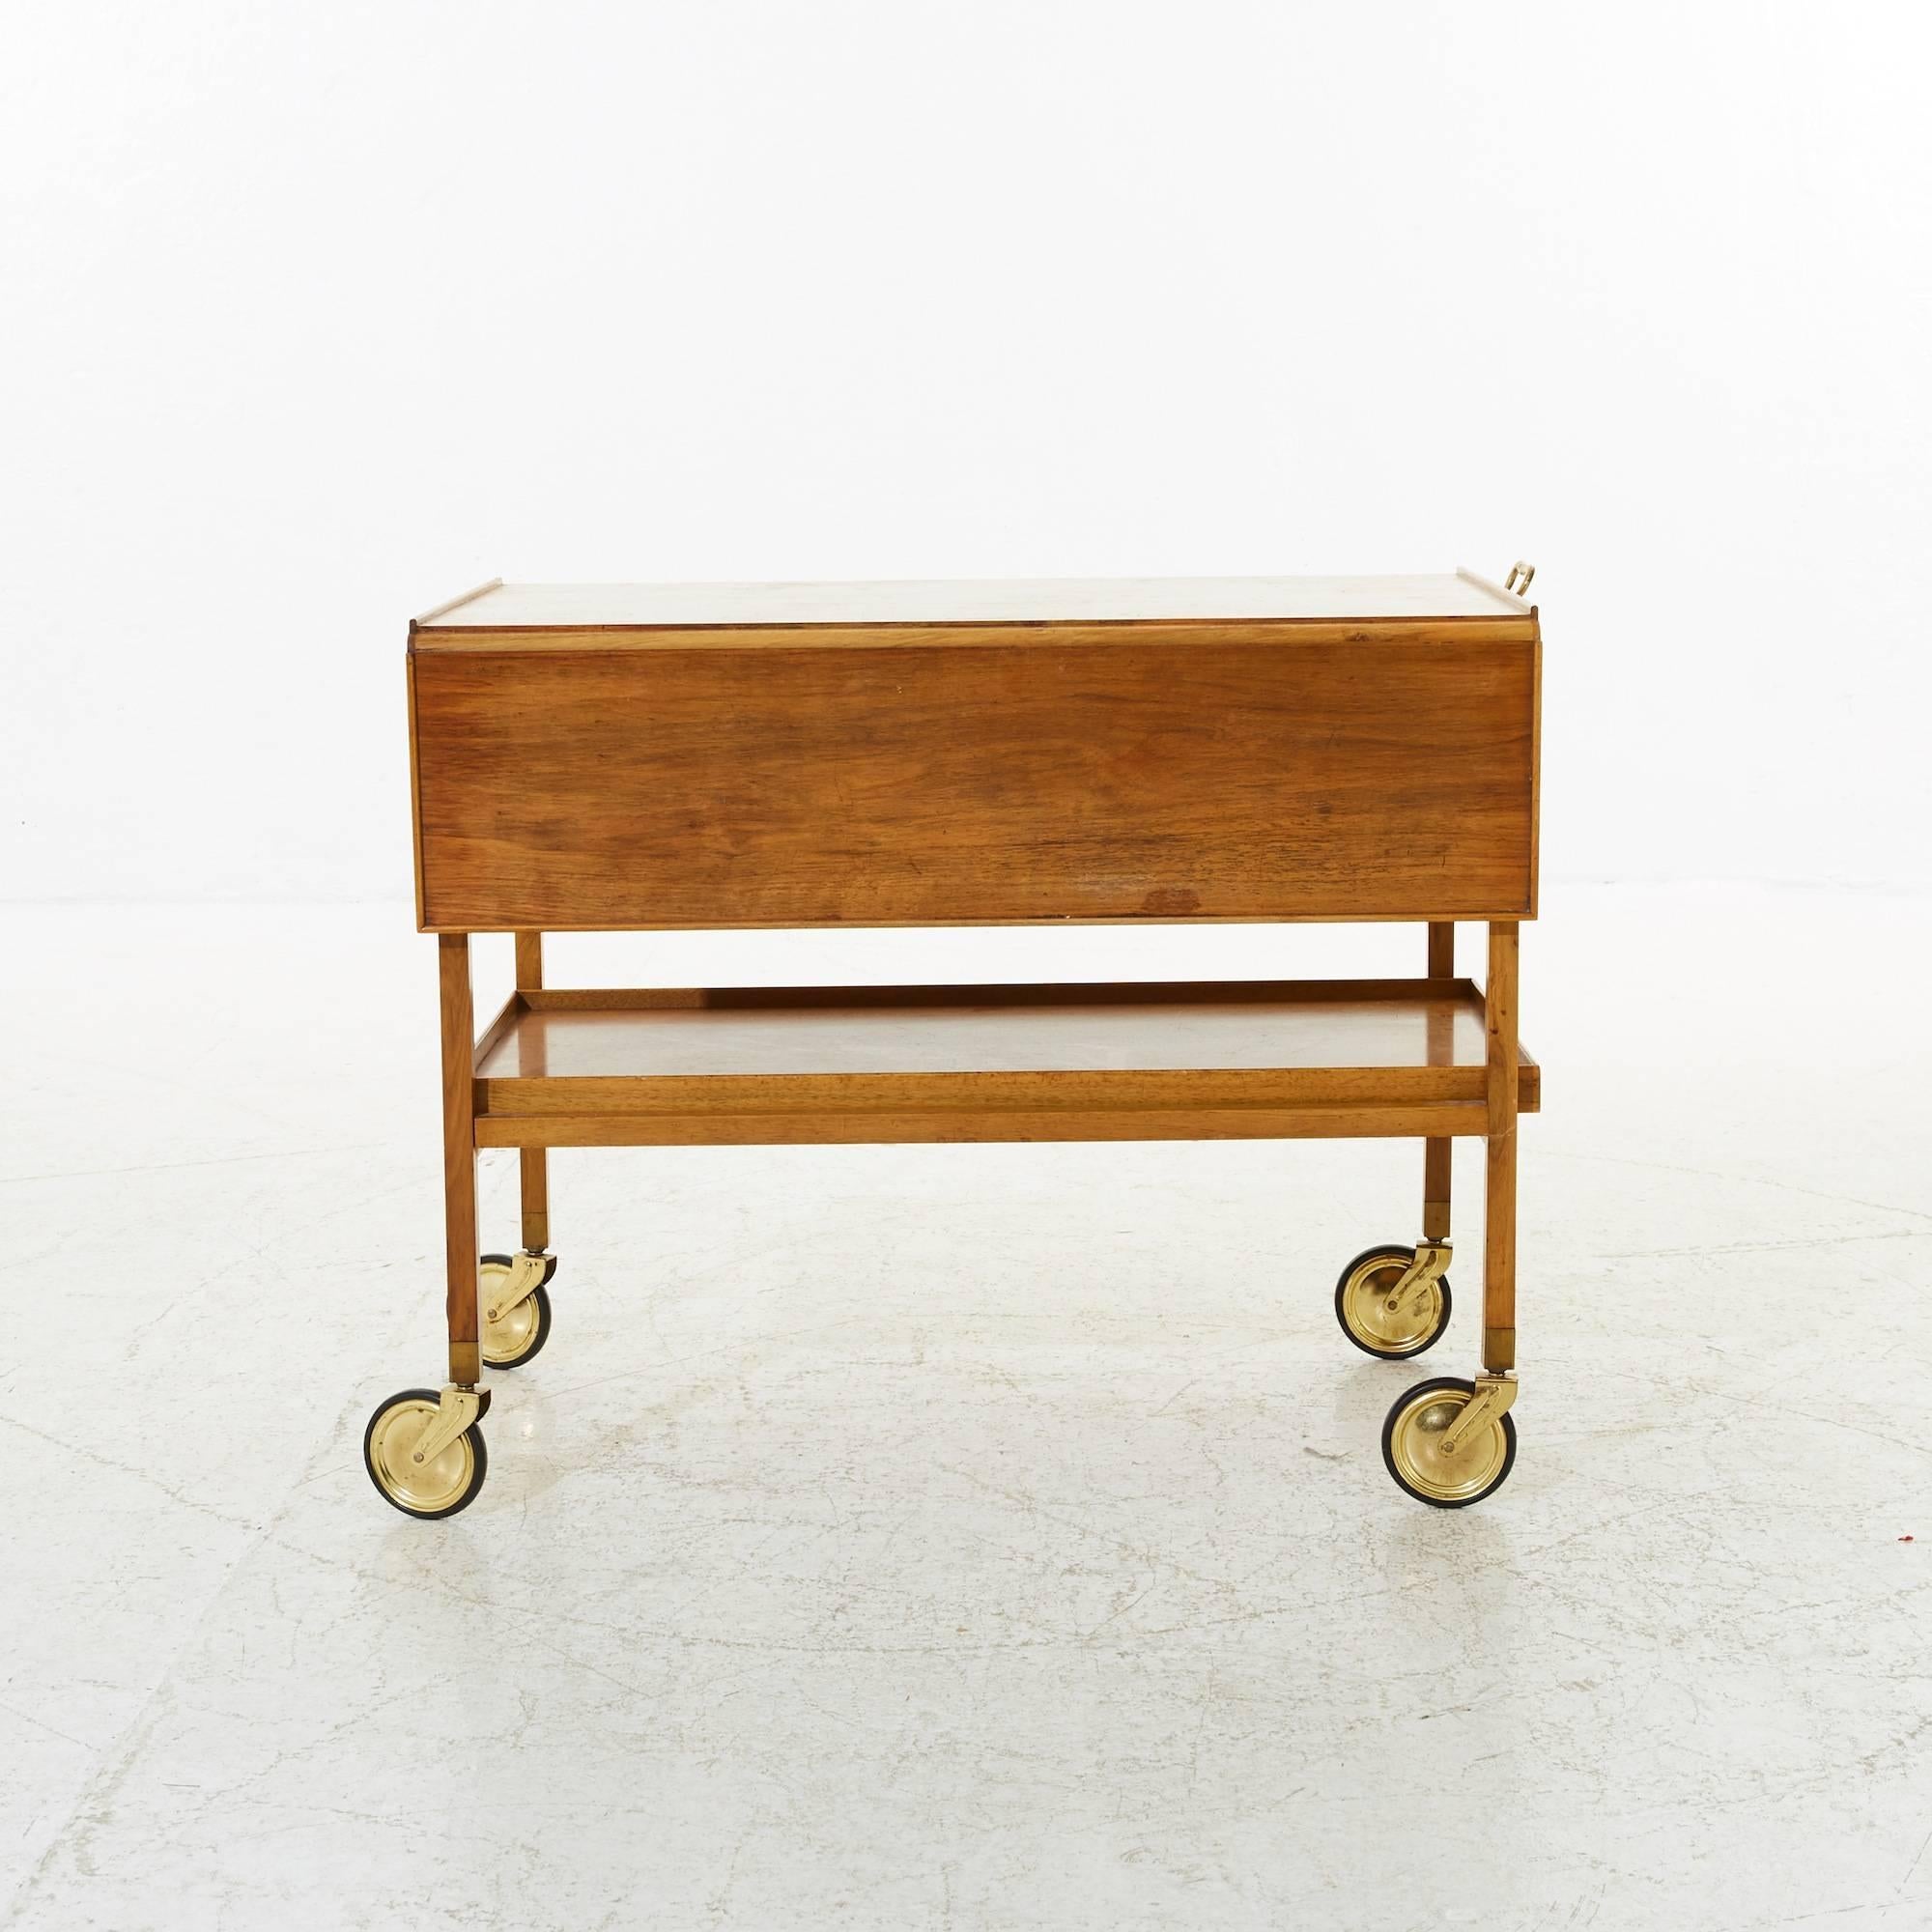 Josef Frank walnut wood trolley with brass handle and brass/rubber wheels. Tray removable, folding top. Producer: Kold Christensen.
Folding top width 50 - 90 cm.